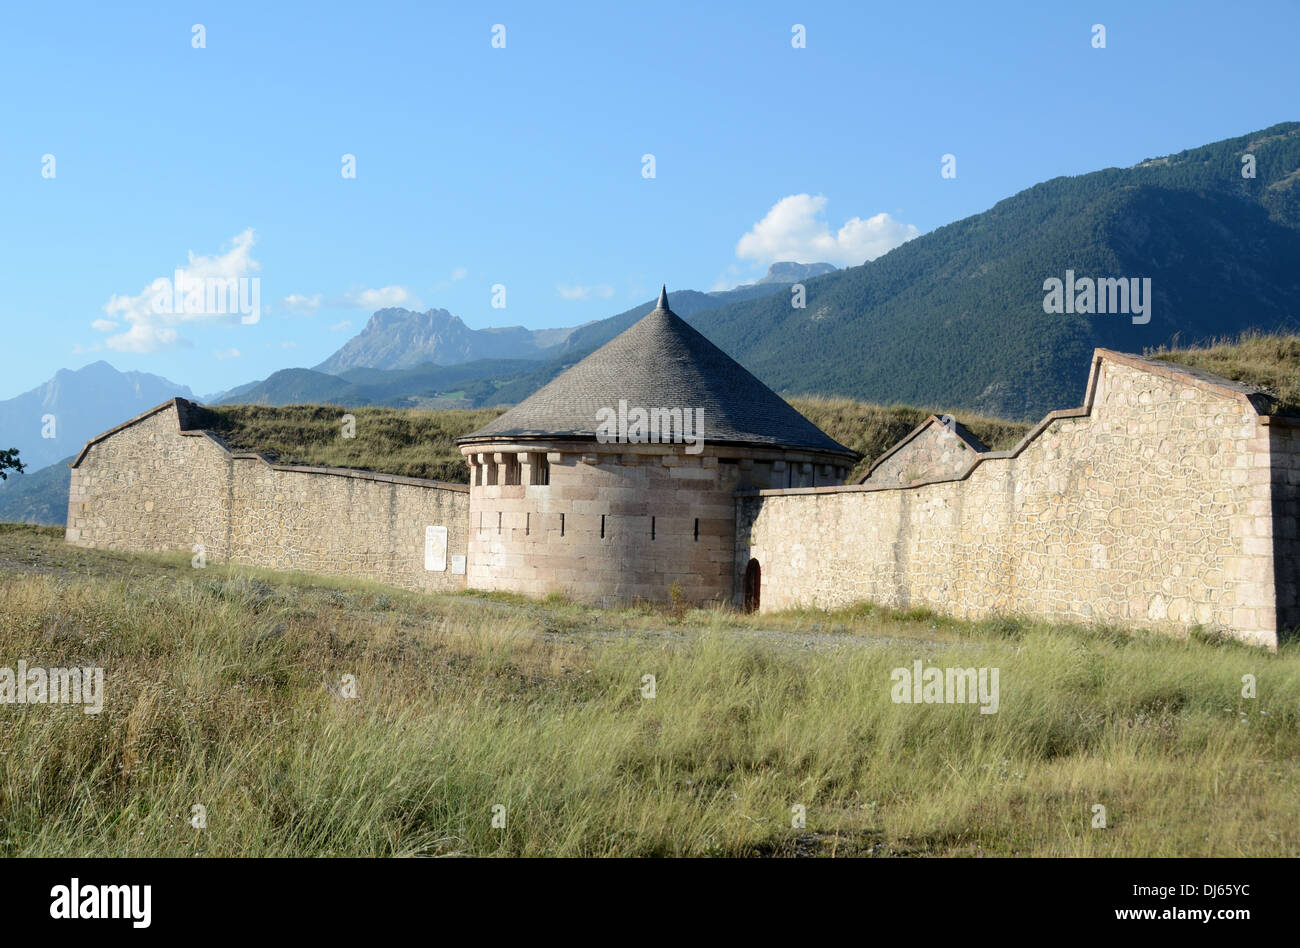 Vauban Fortifications and Look-out Tower of Walled Military Town of Mont-Dauphin Hautes-Alpes France Stock Photo